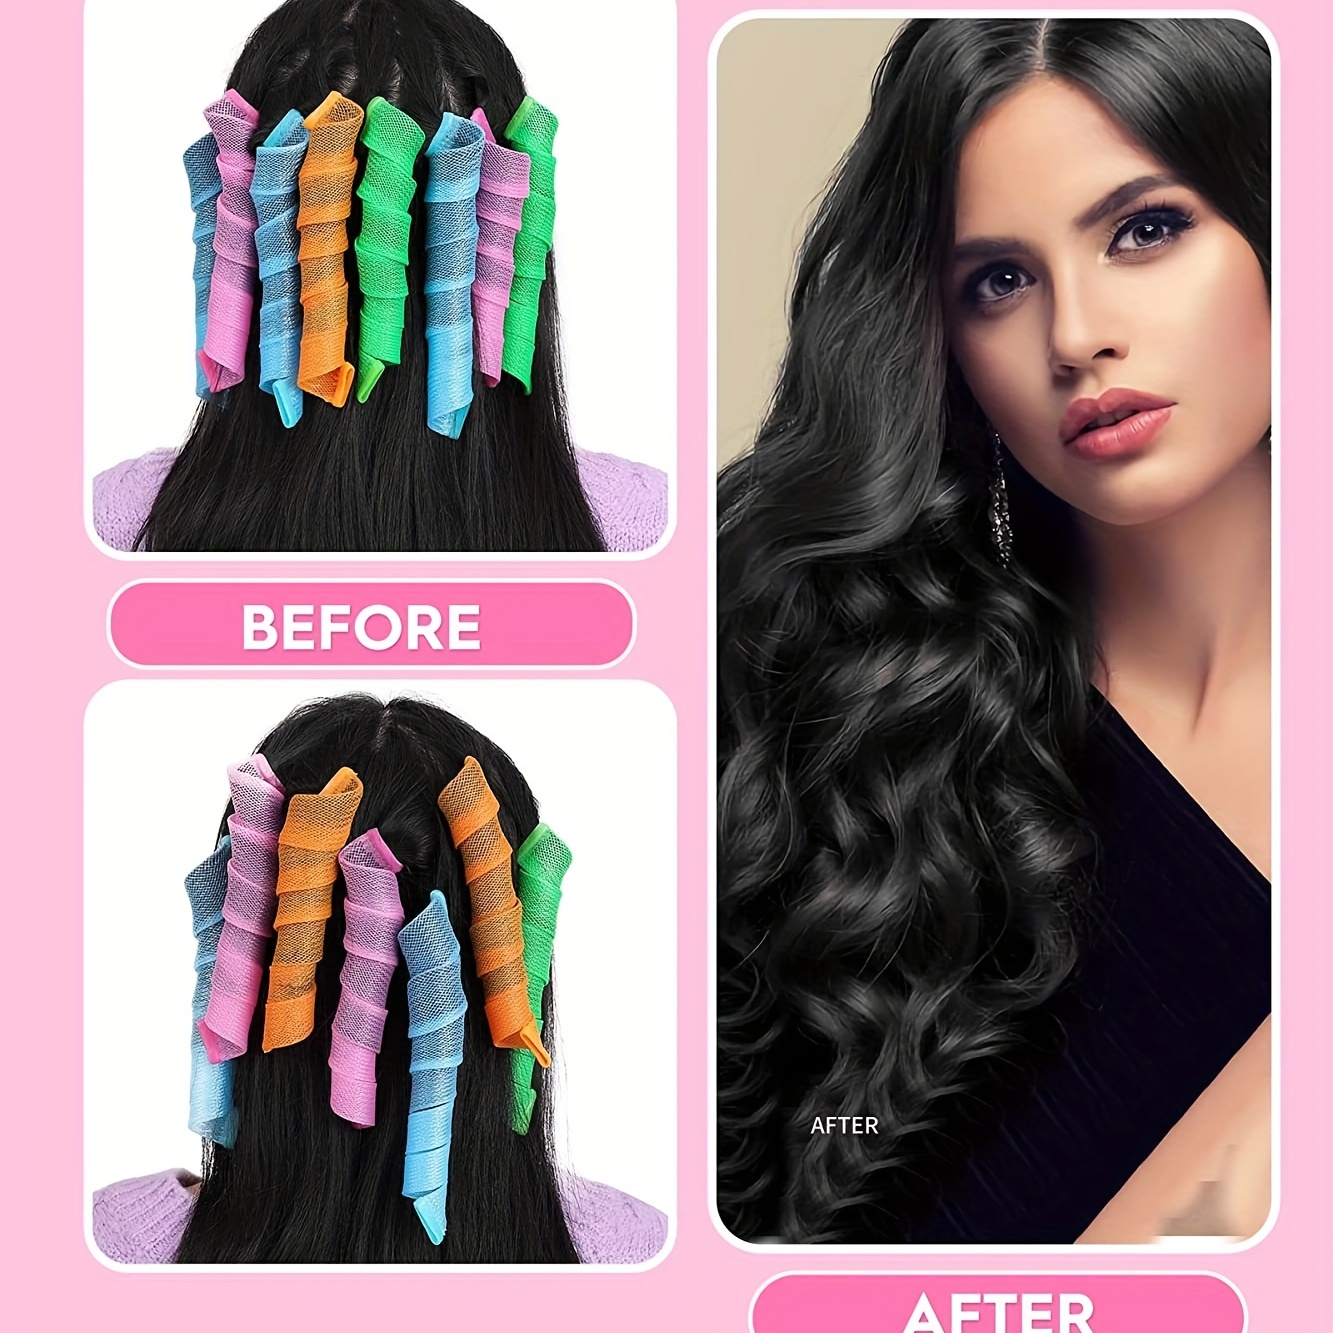 12 Pcs Hair Curlers Spiral Curls No Heat Wave Hair Styling Kit with Hook